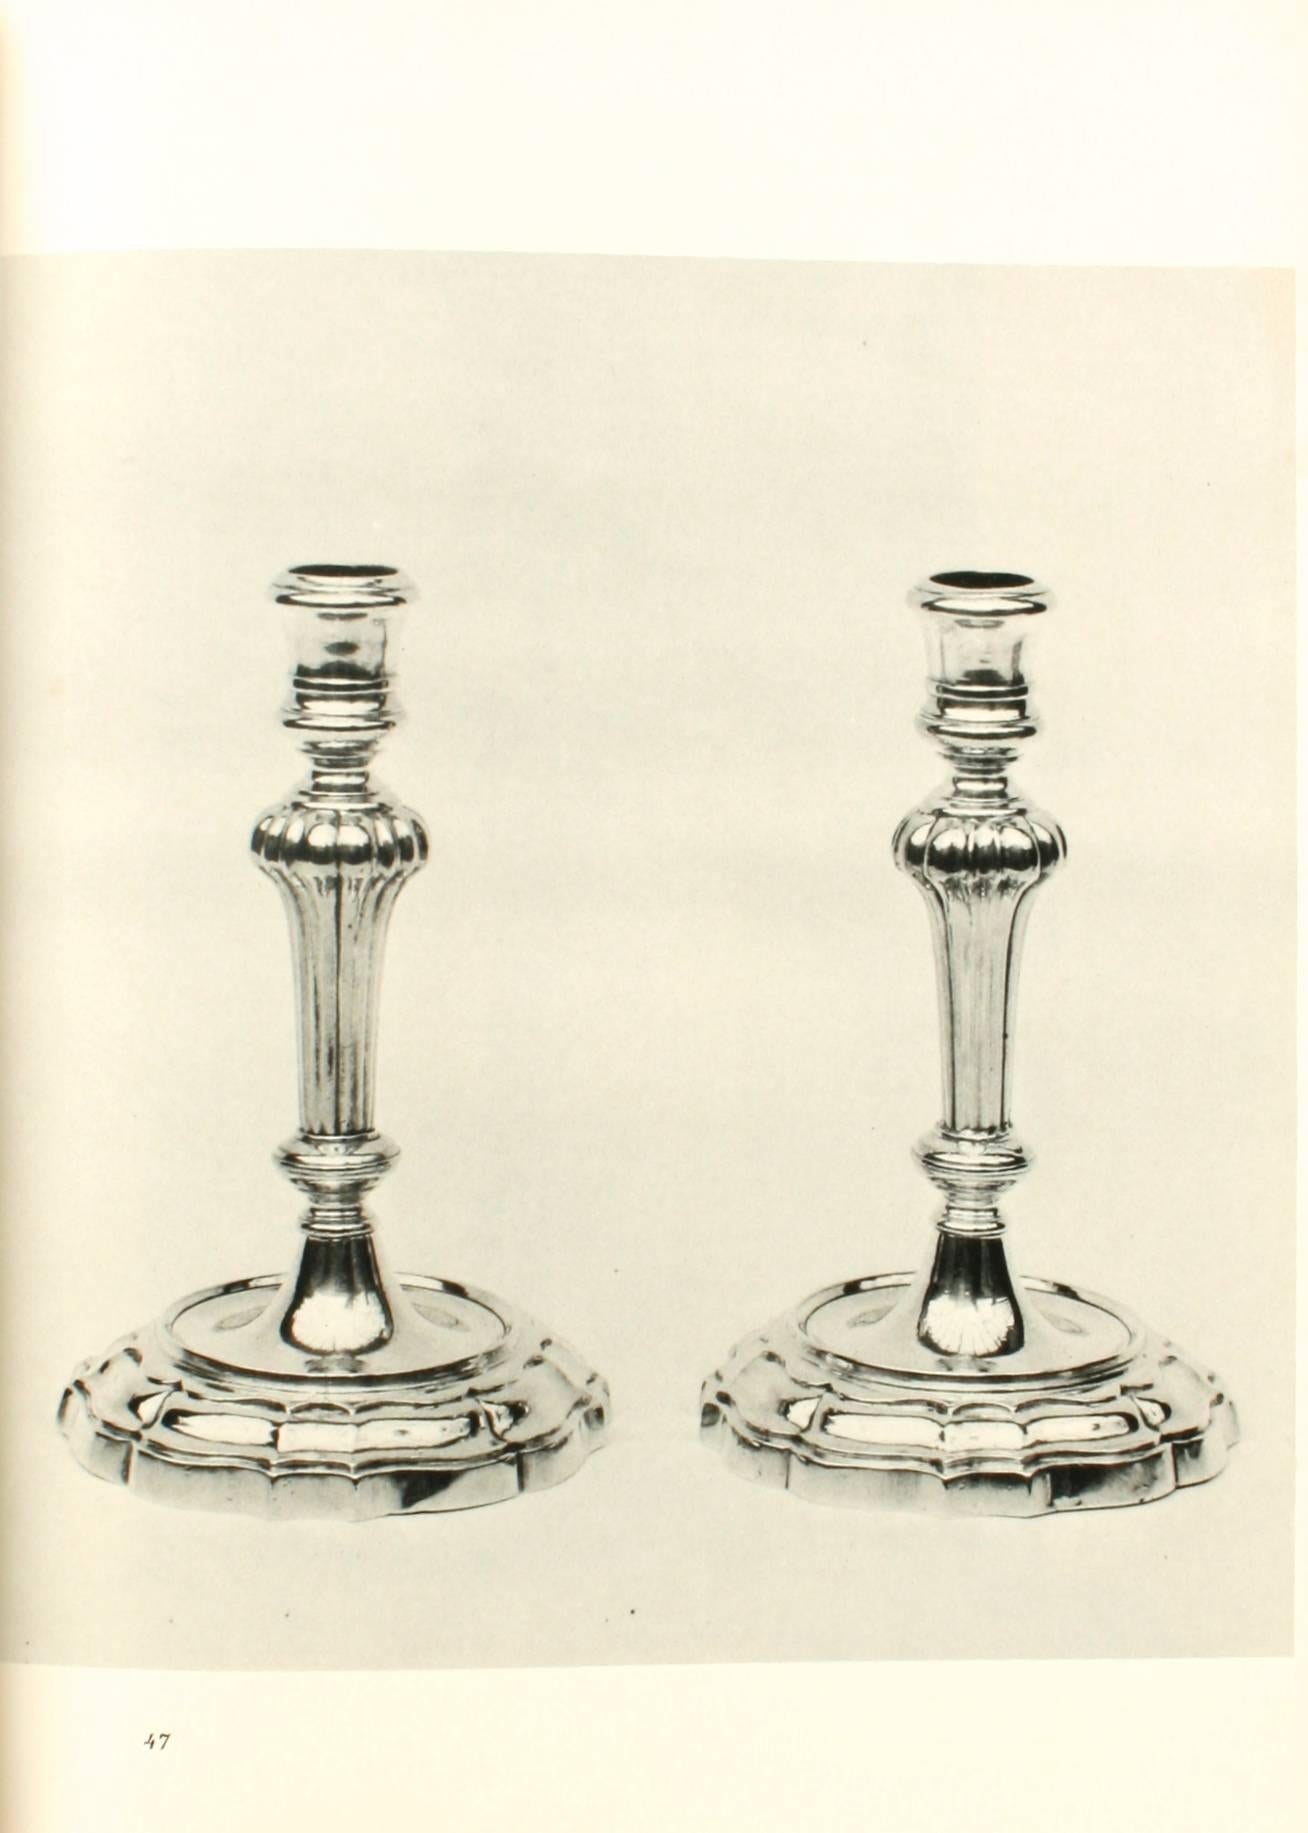 Candleholders in America, 1650-1900 by Joseph T. Butler. NY: Bonanza Books, 1967. First edition thus hardcover with dust jacket. 178 pp. 136 full-page photos of candlesticks, candelabra, chandeliers, sconces, candle stands, lanterns, and candle